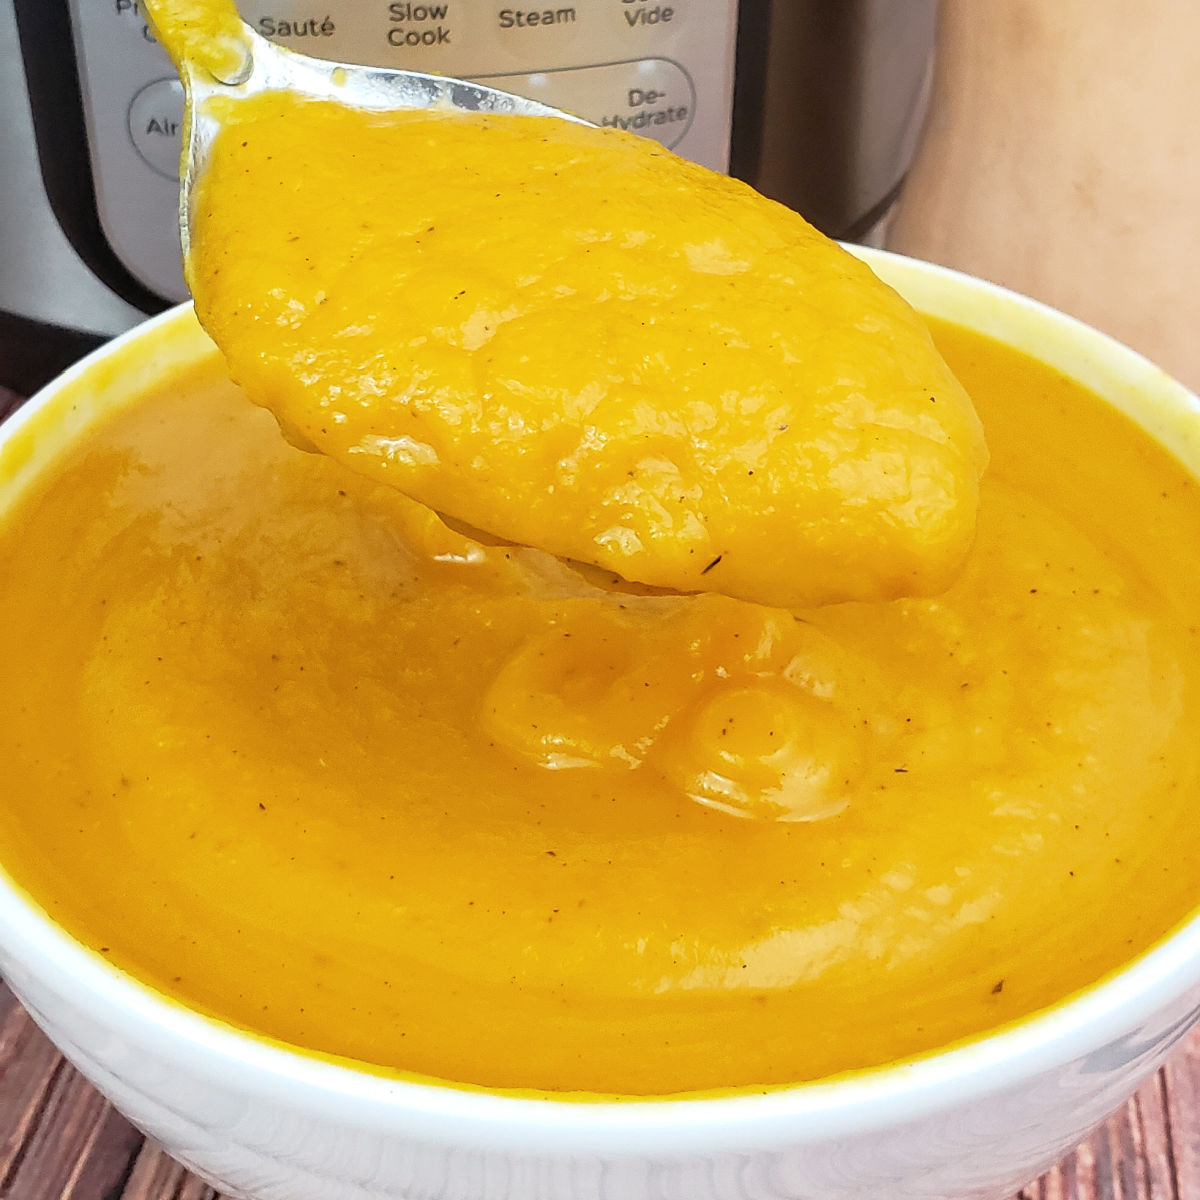 Butternut squash soup being served with a spoon in front of an Instant Pot.